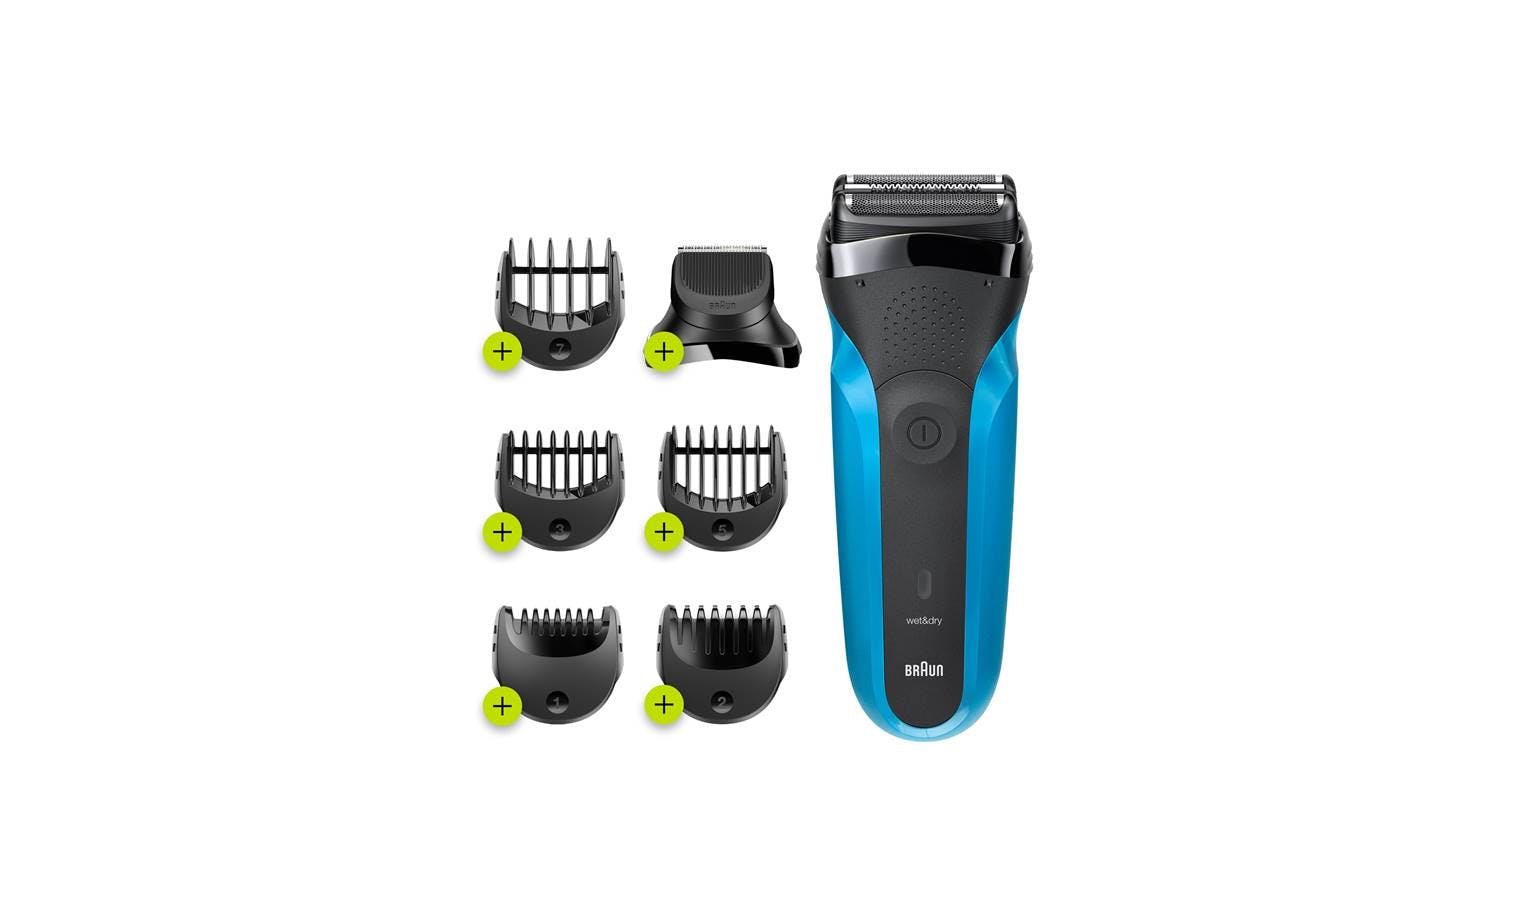 Braun Series 3 310 Electric Shaver, Wet & Dry Razor for Men, Electricals